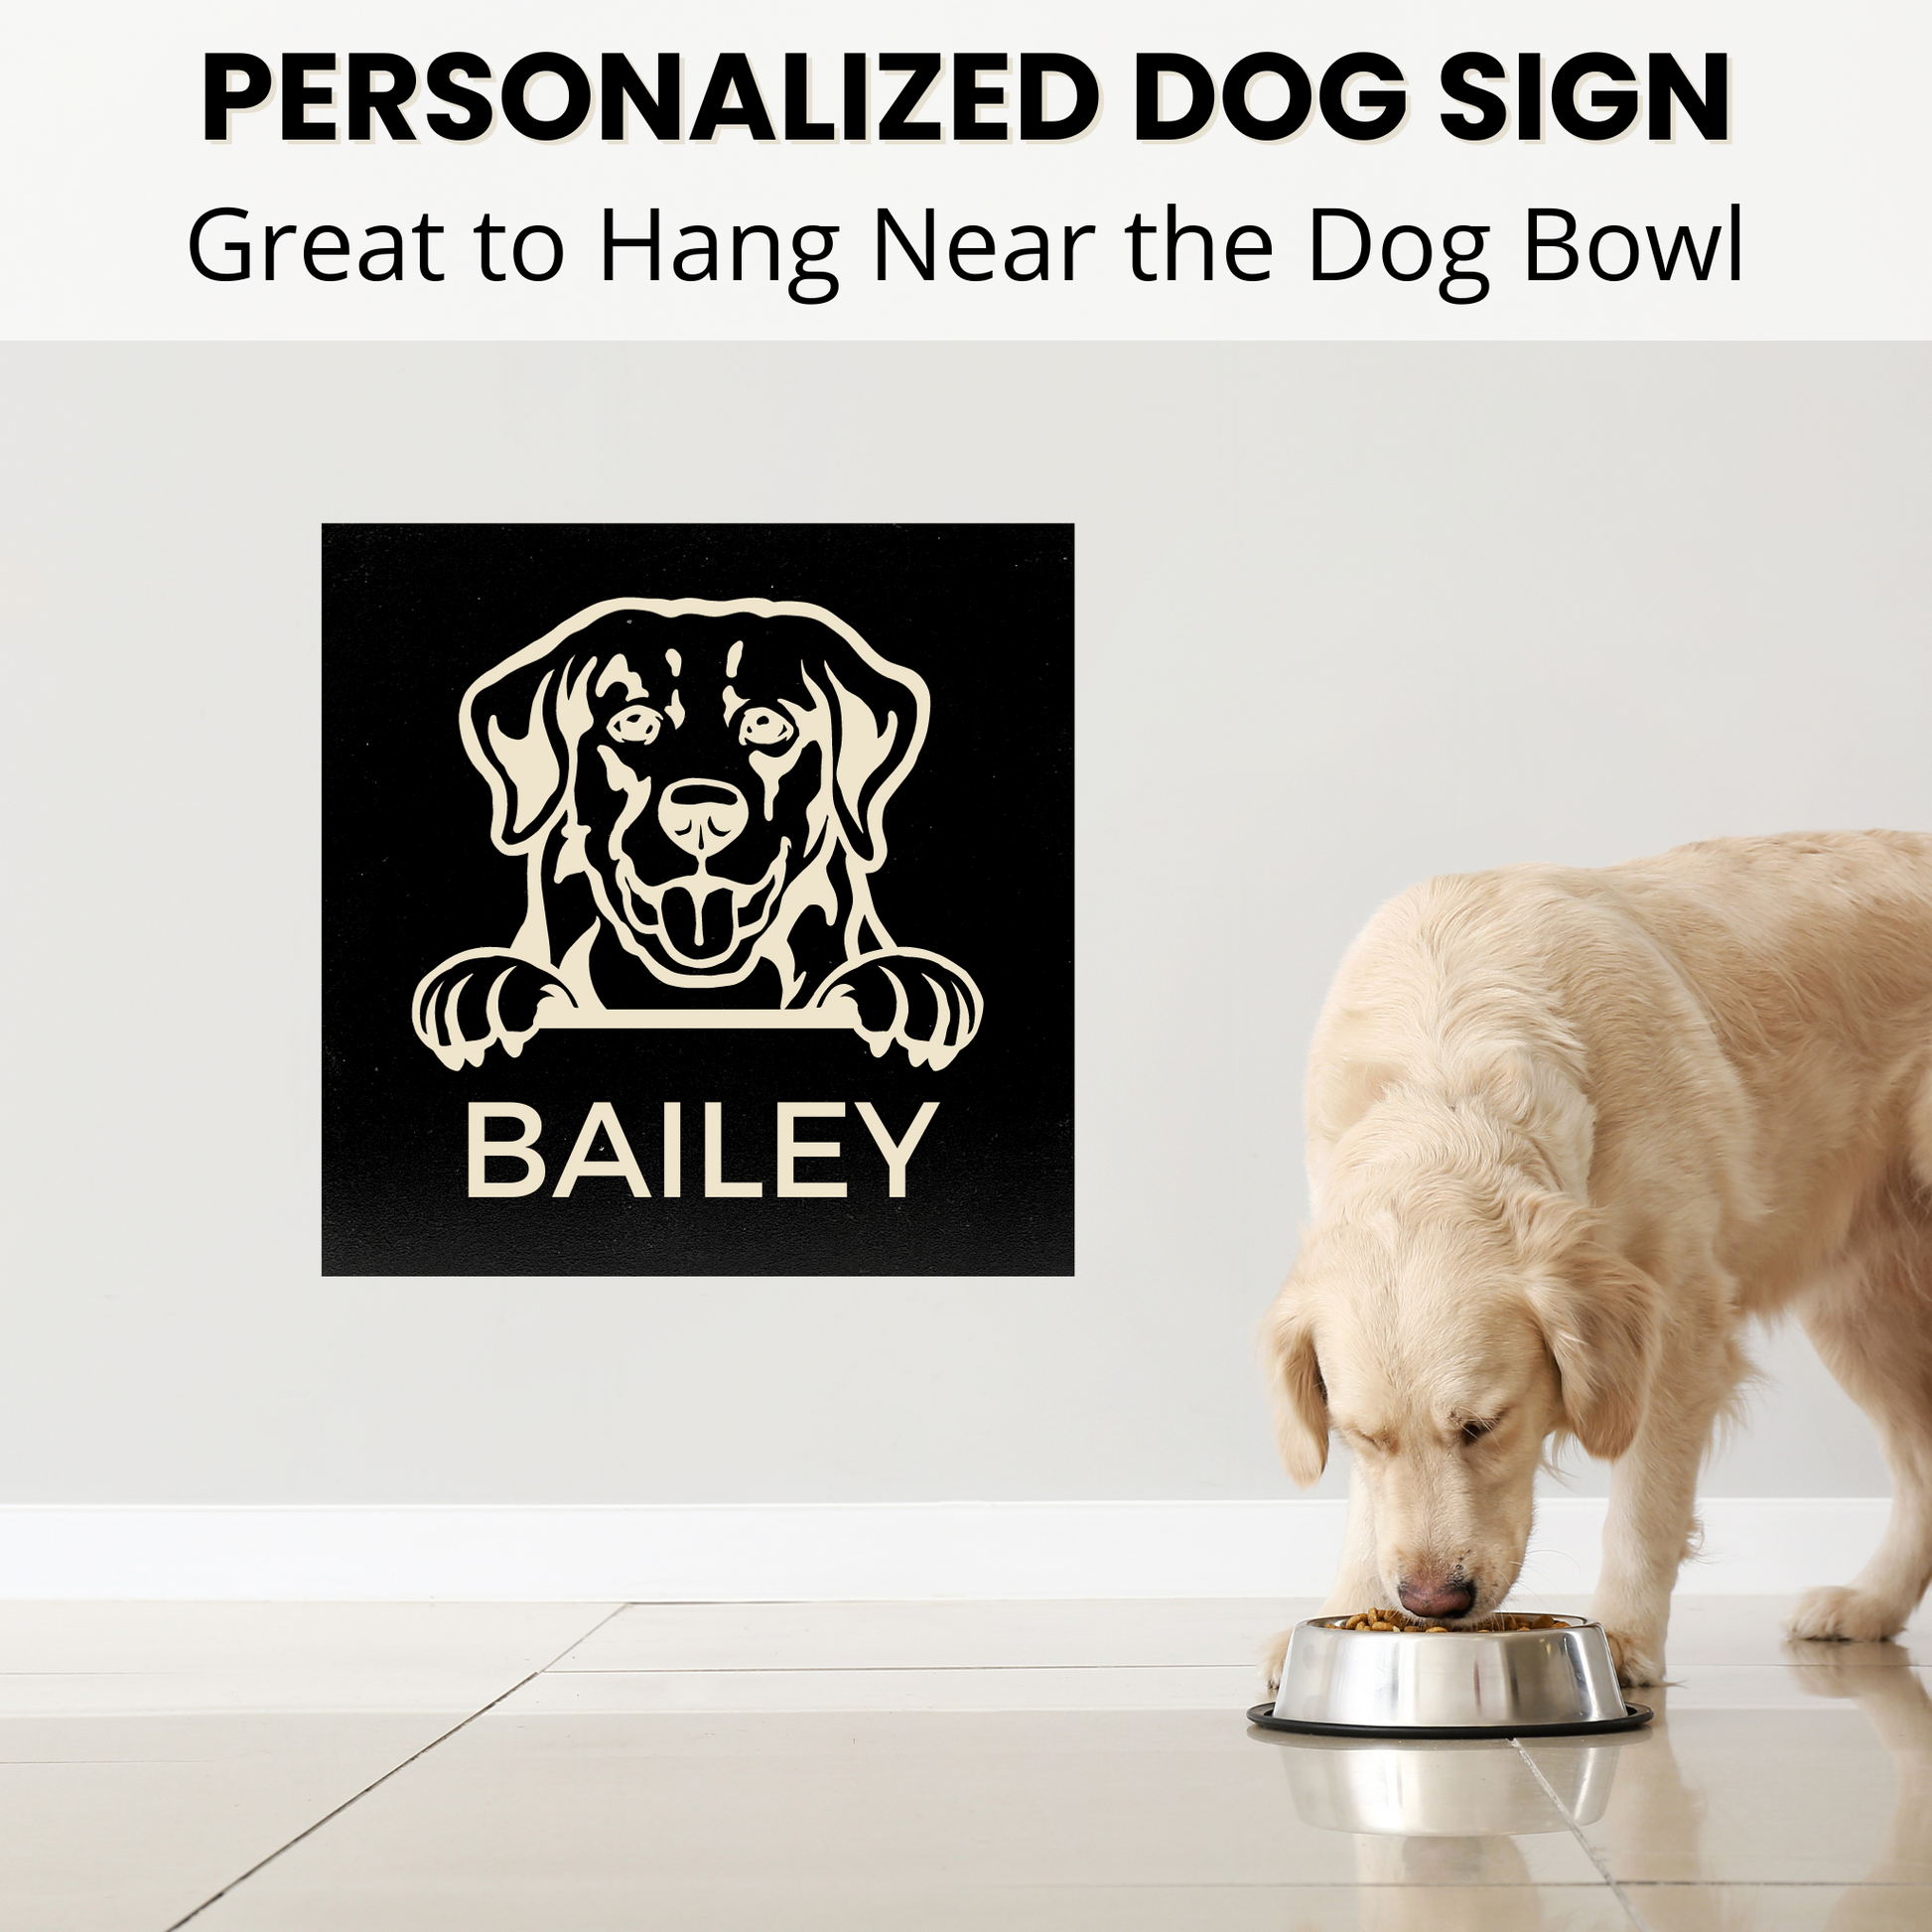 Personalized Carved Wooden Dog Sign near Dog Bowl